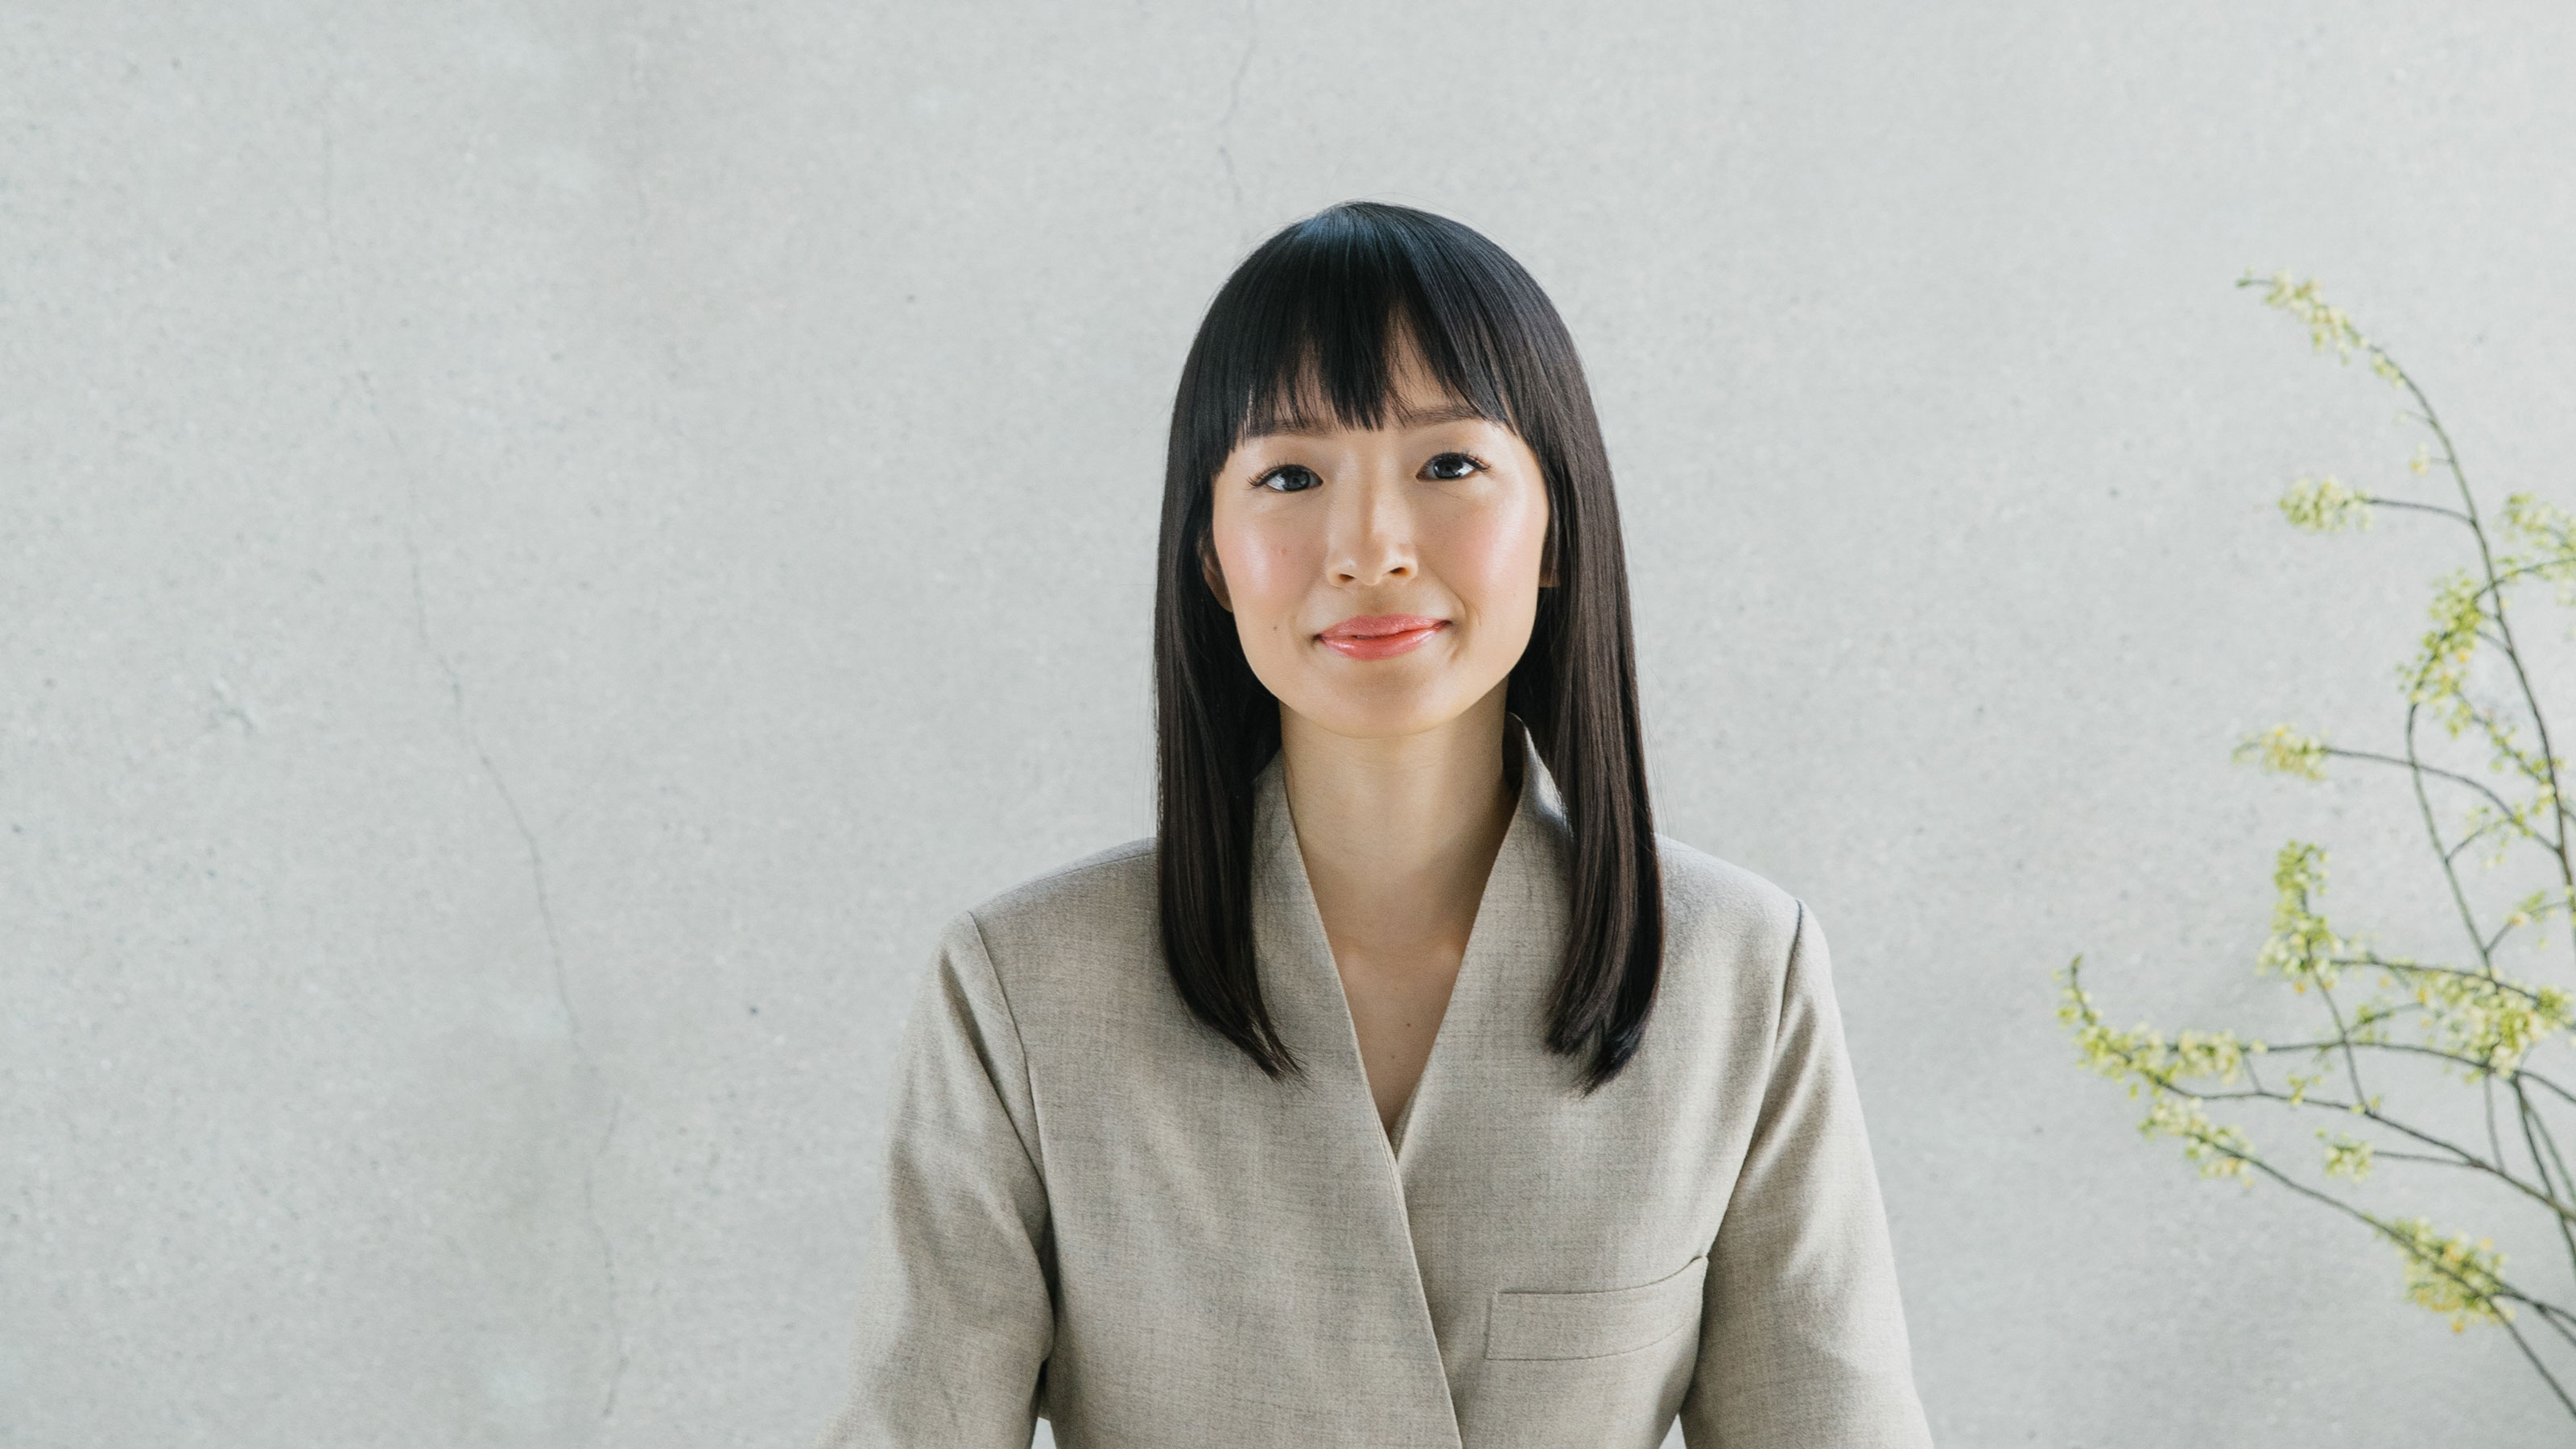 Marie Kondo's net worth and its ties to the simple concept of 'sparking joy